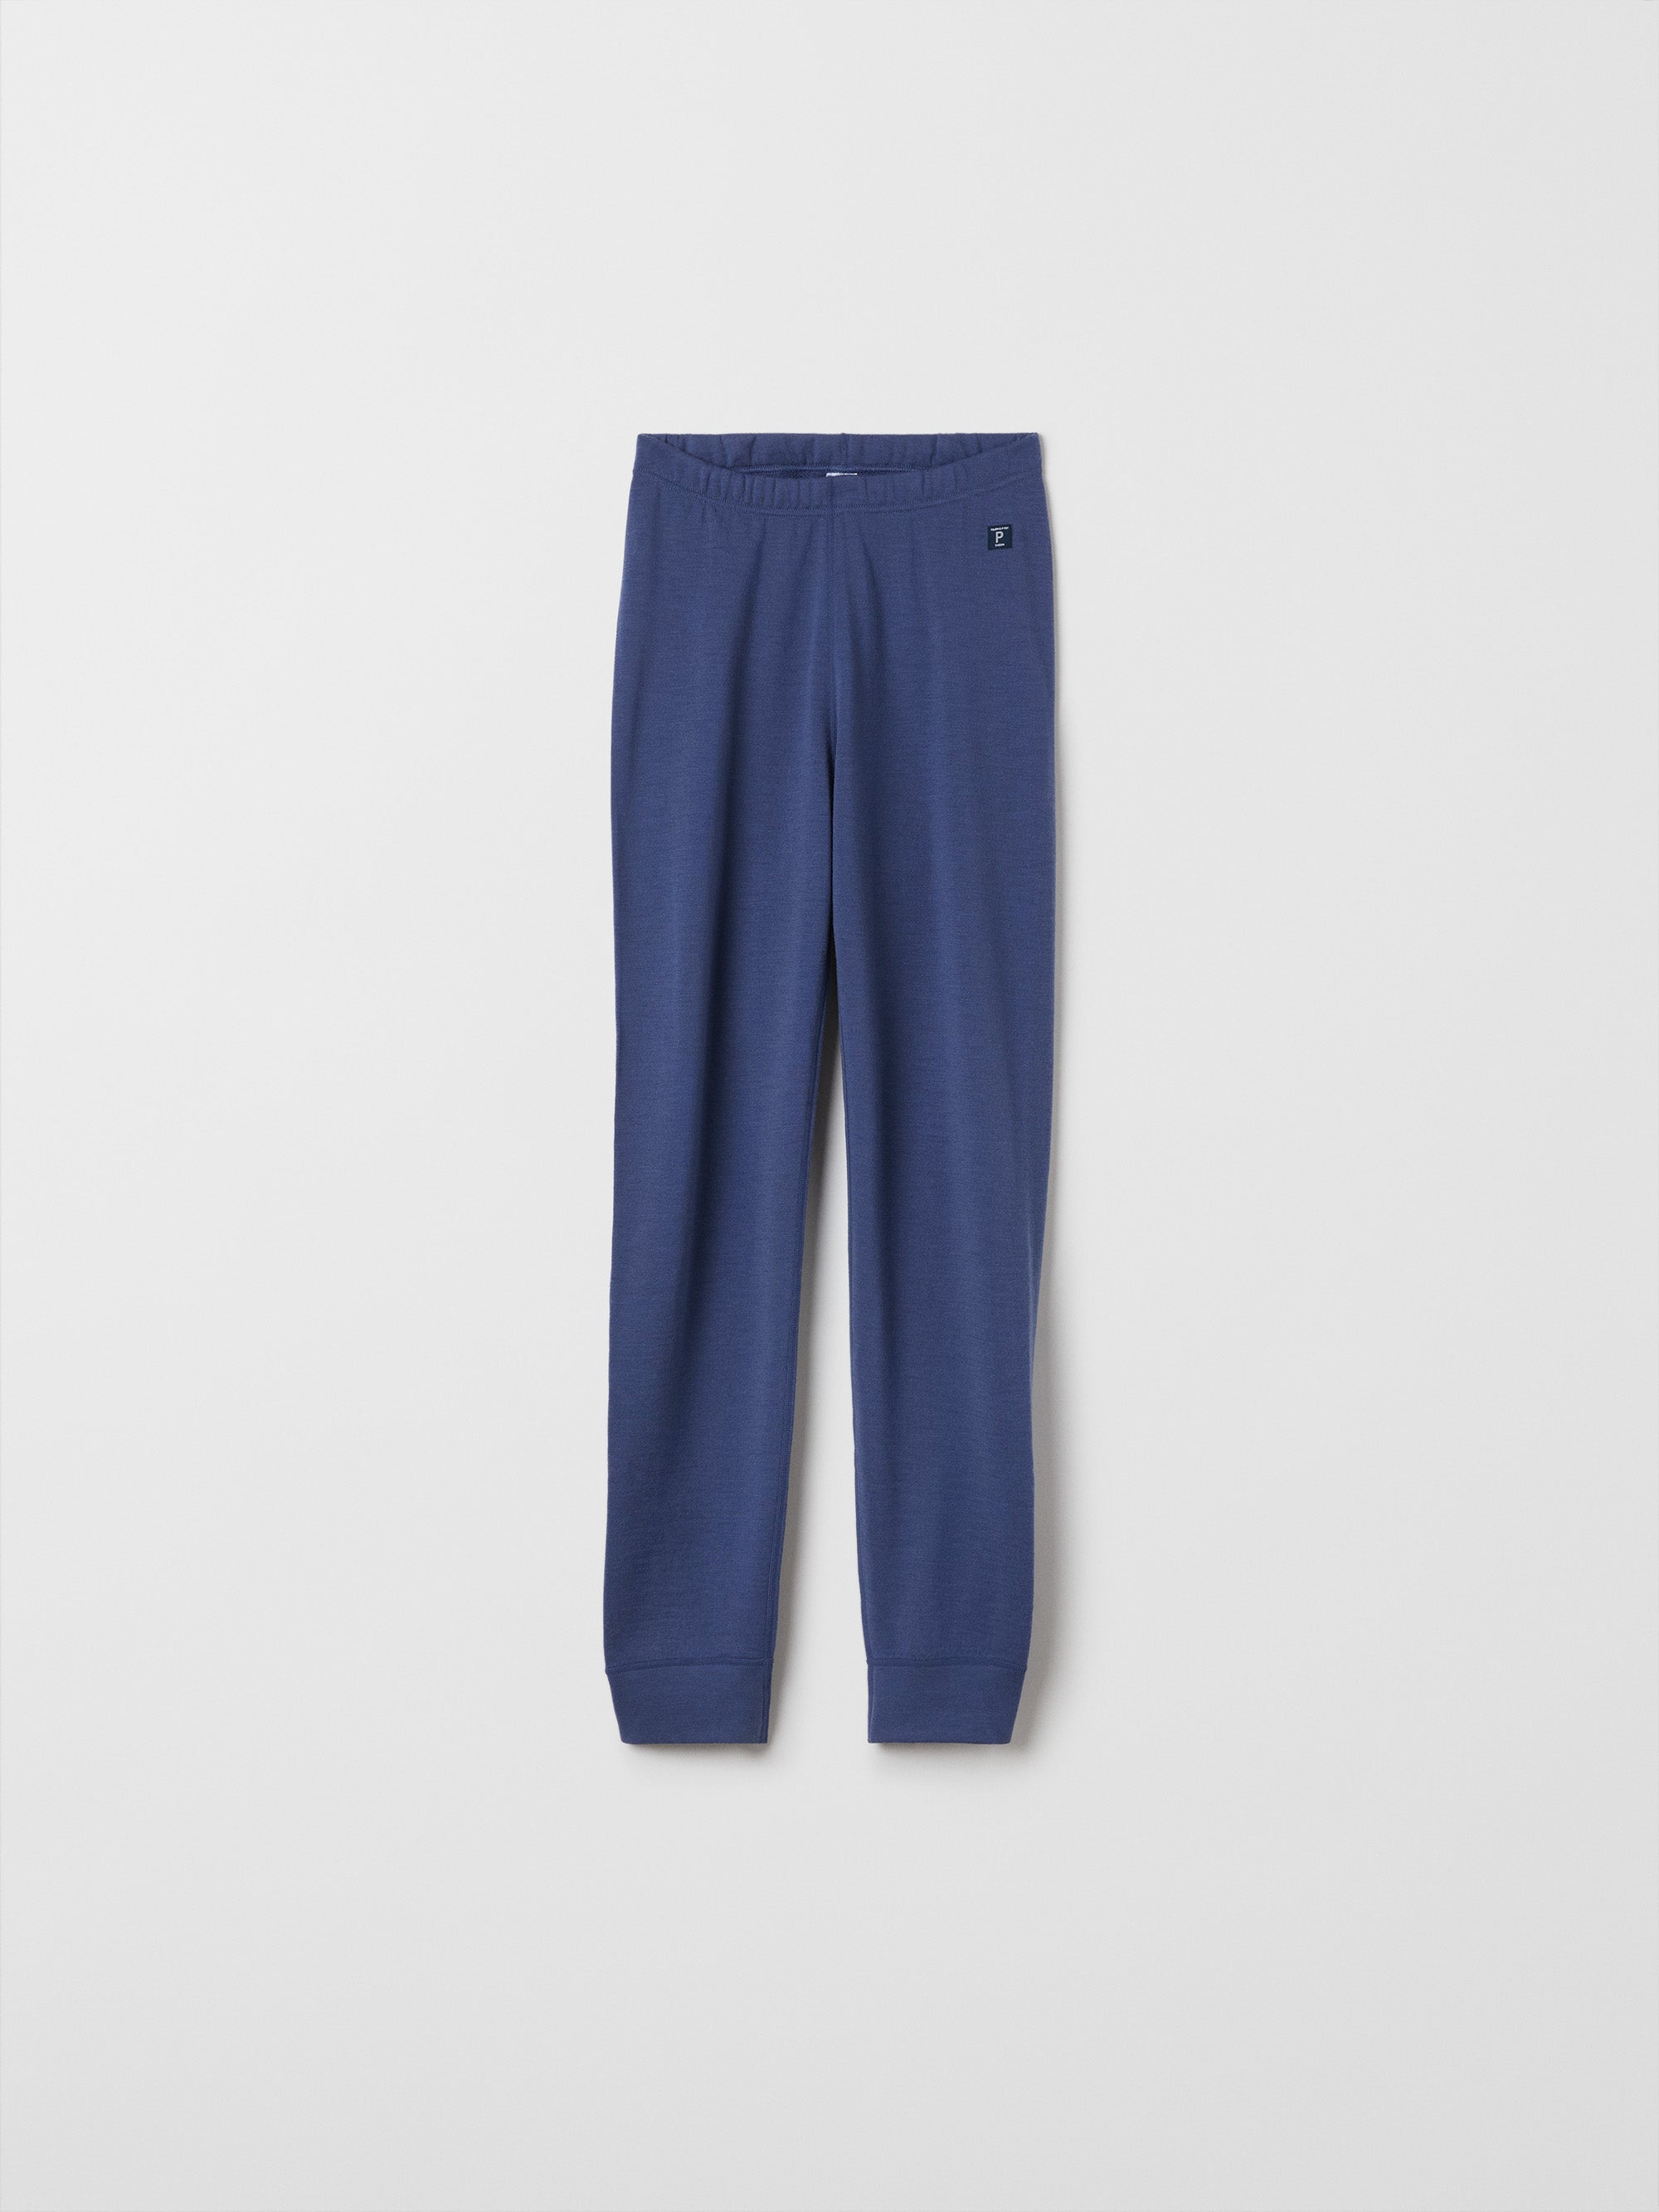 Adult Wool Terry Long Johns